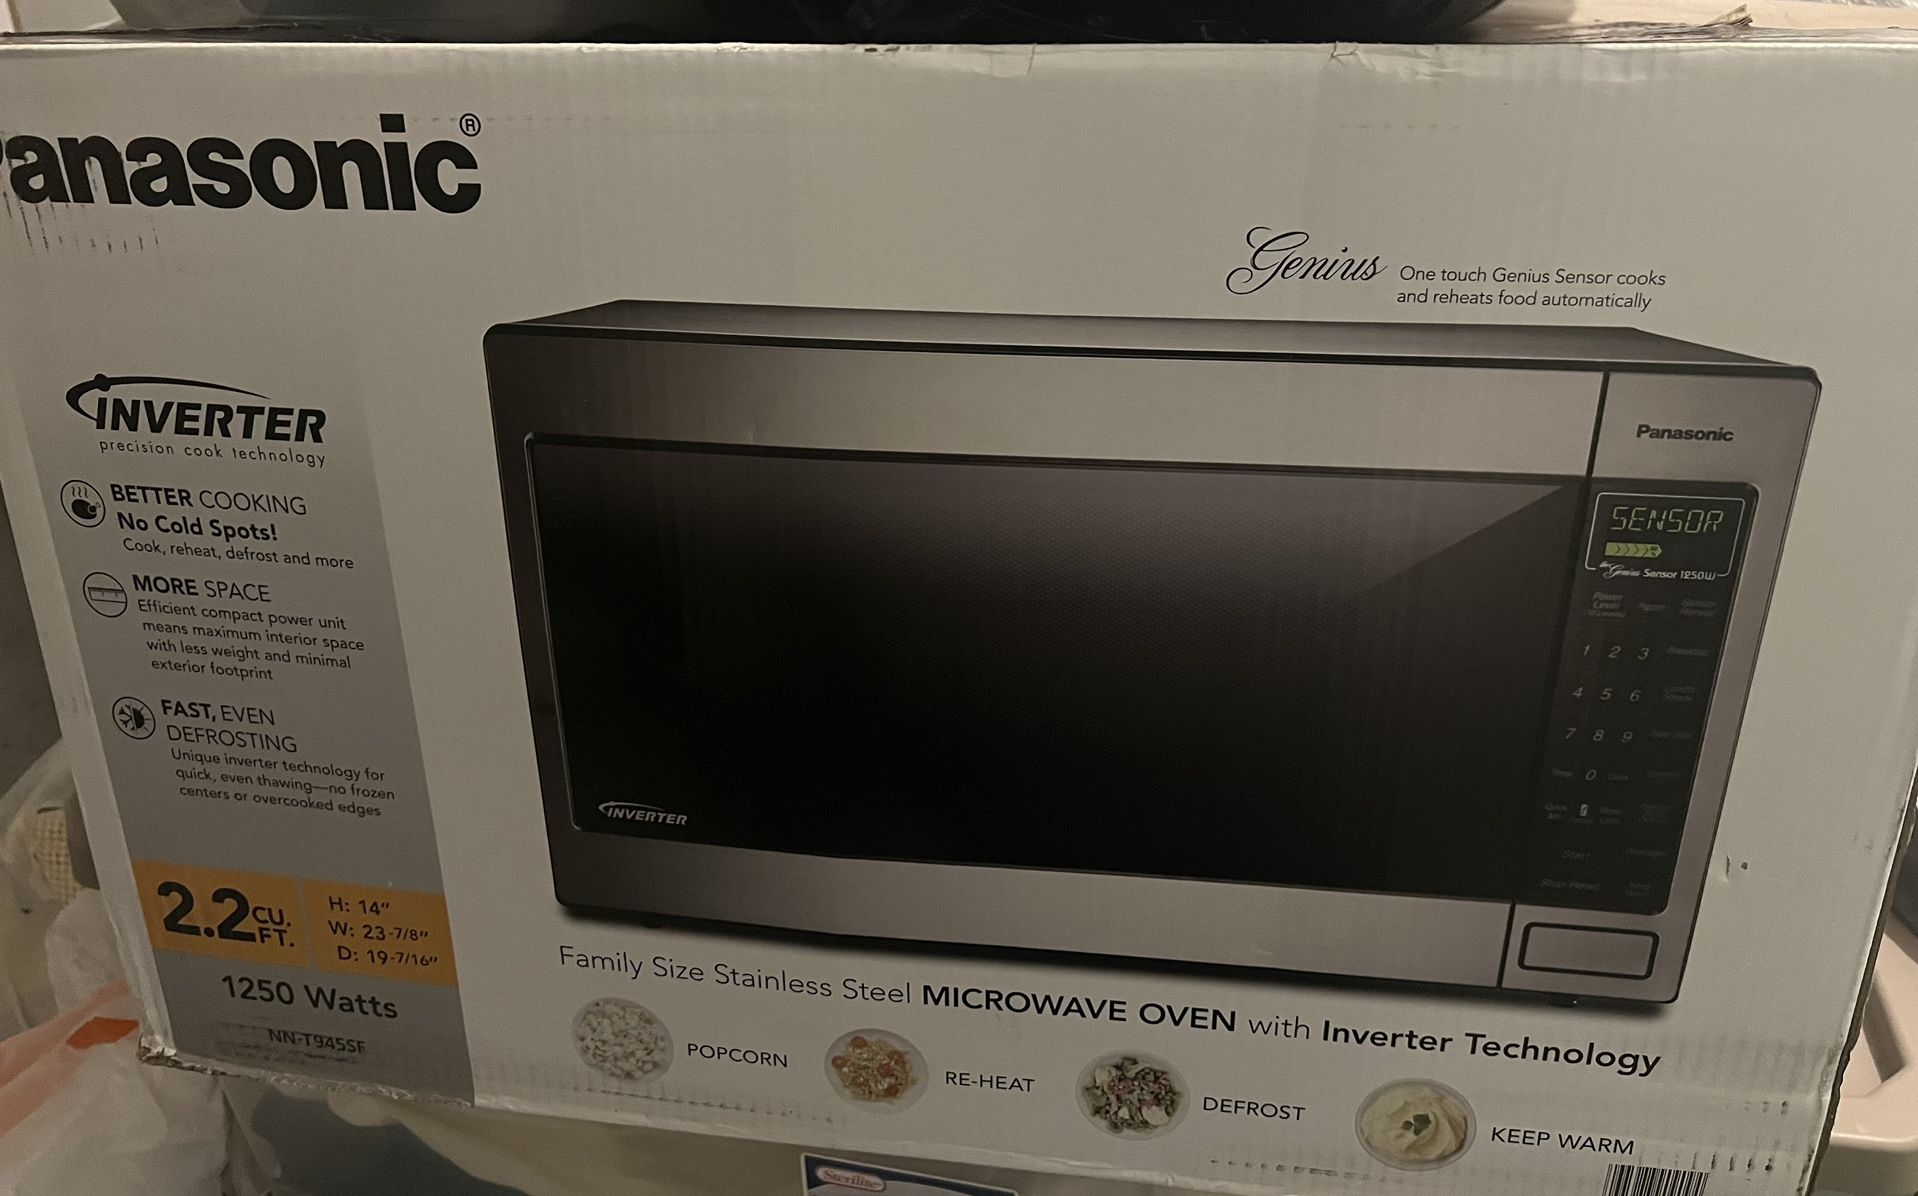 Large Microwave In Box